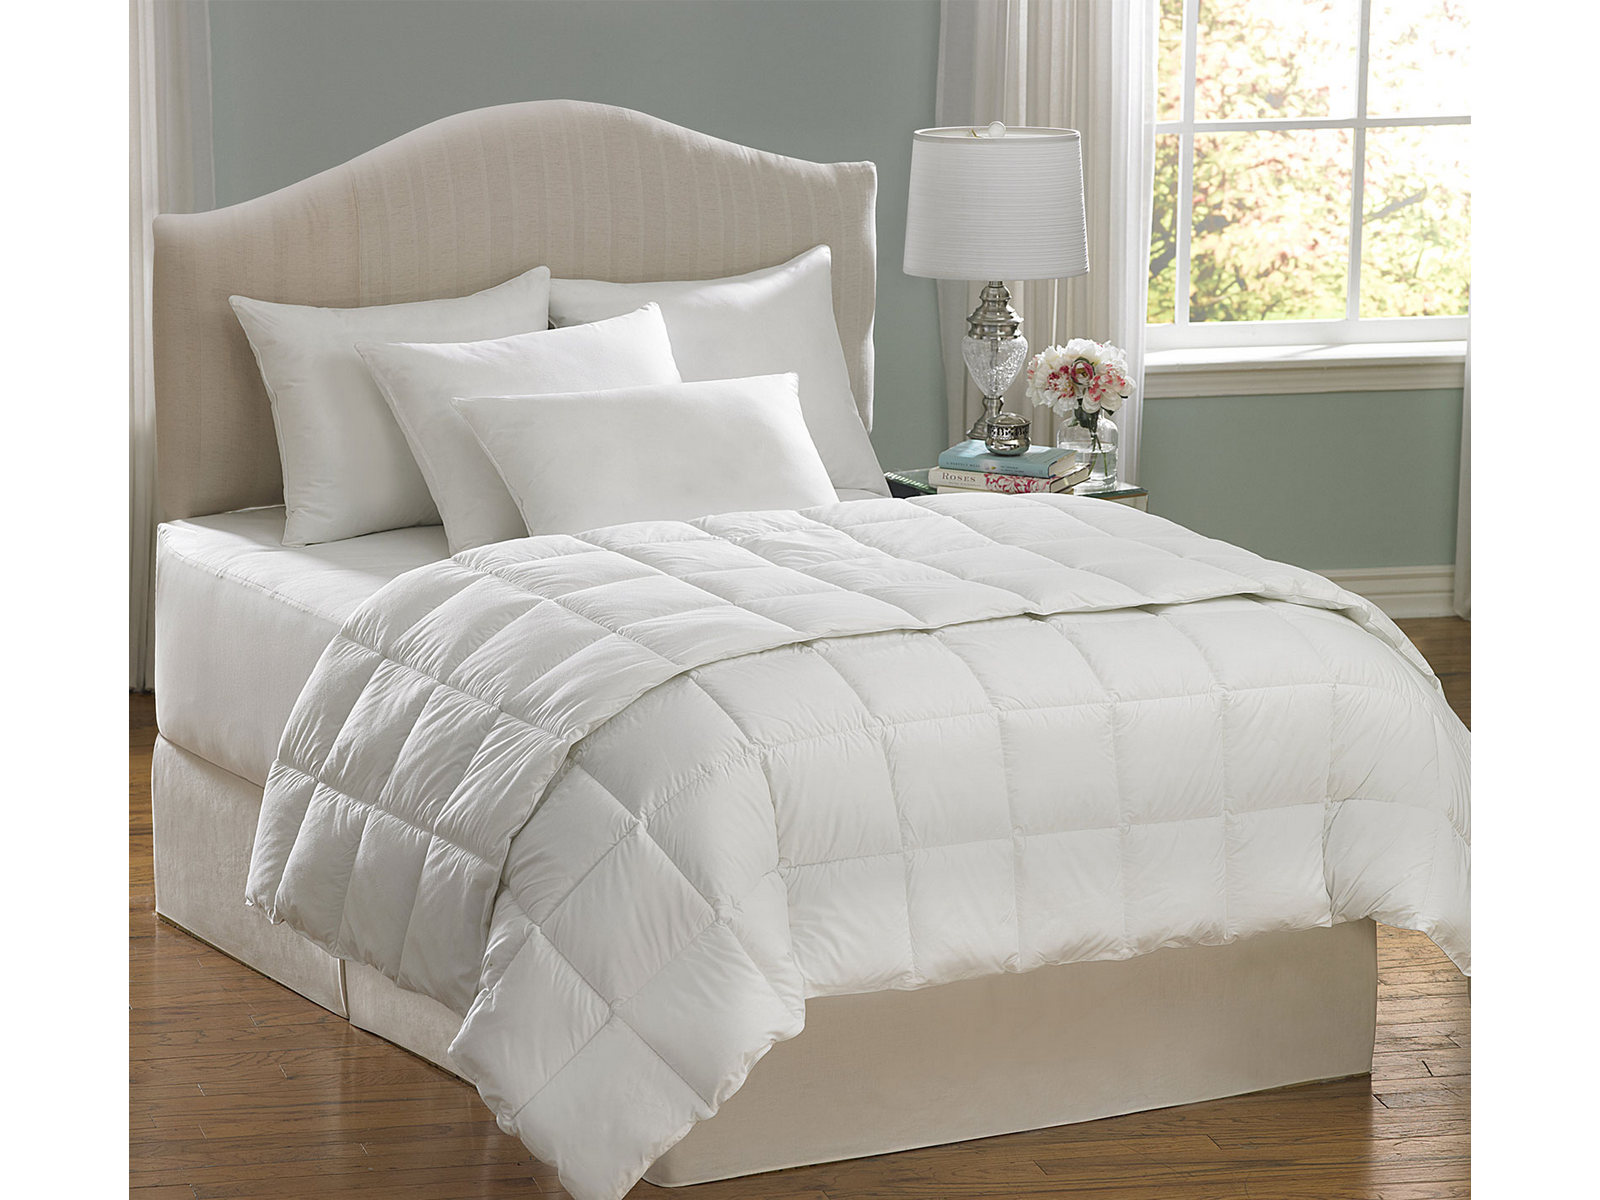 Allerease Twin Cotton Comforter